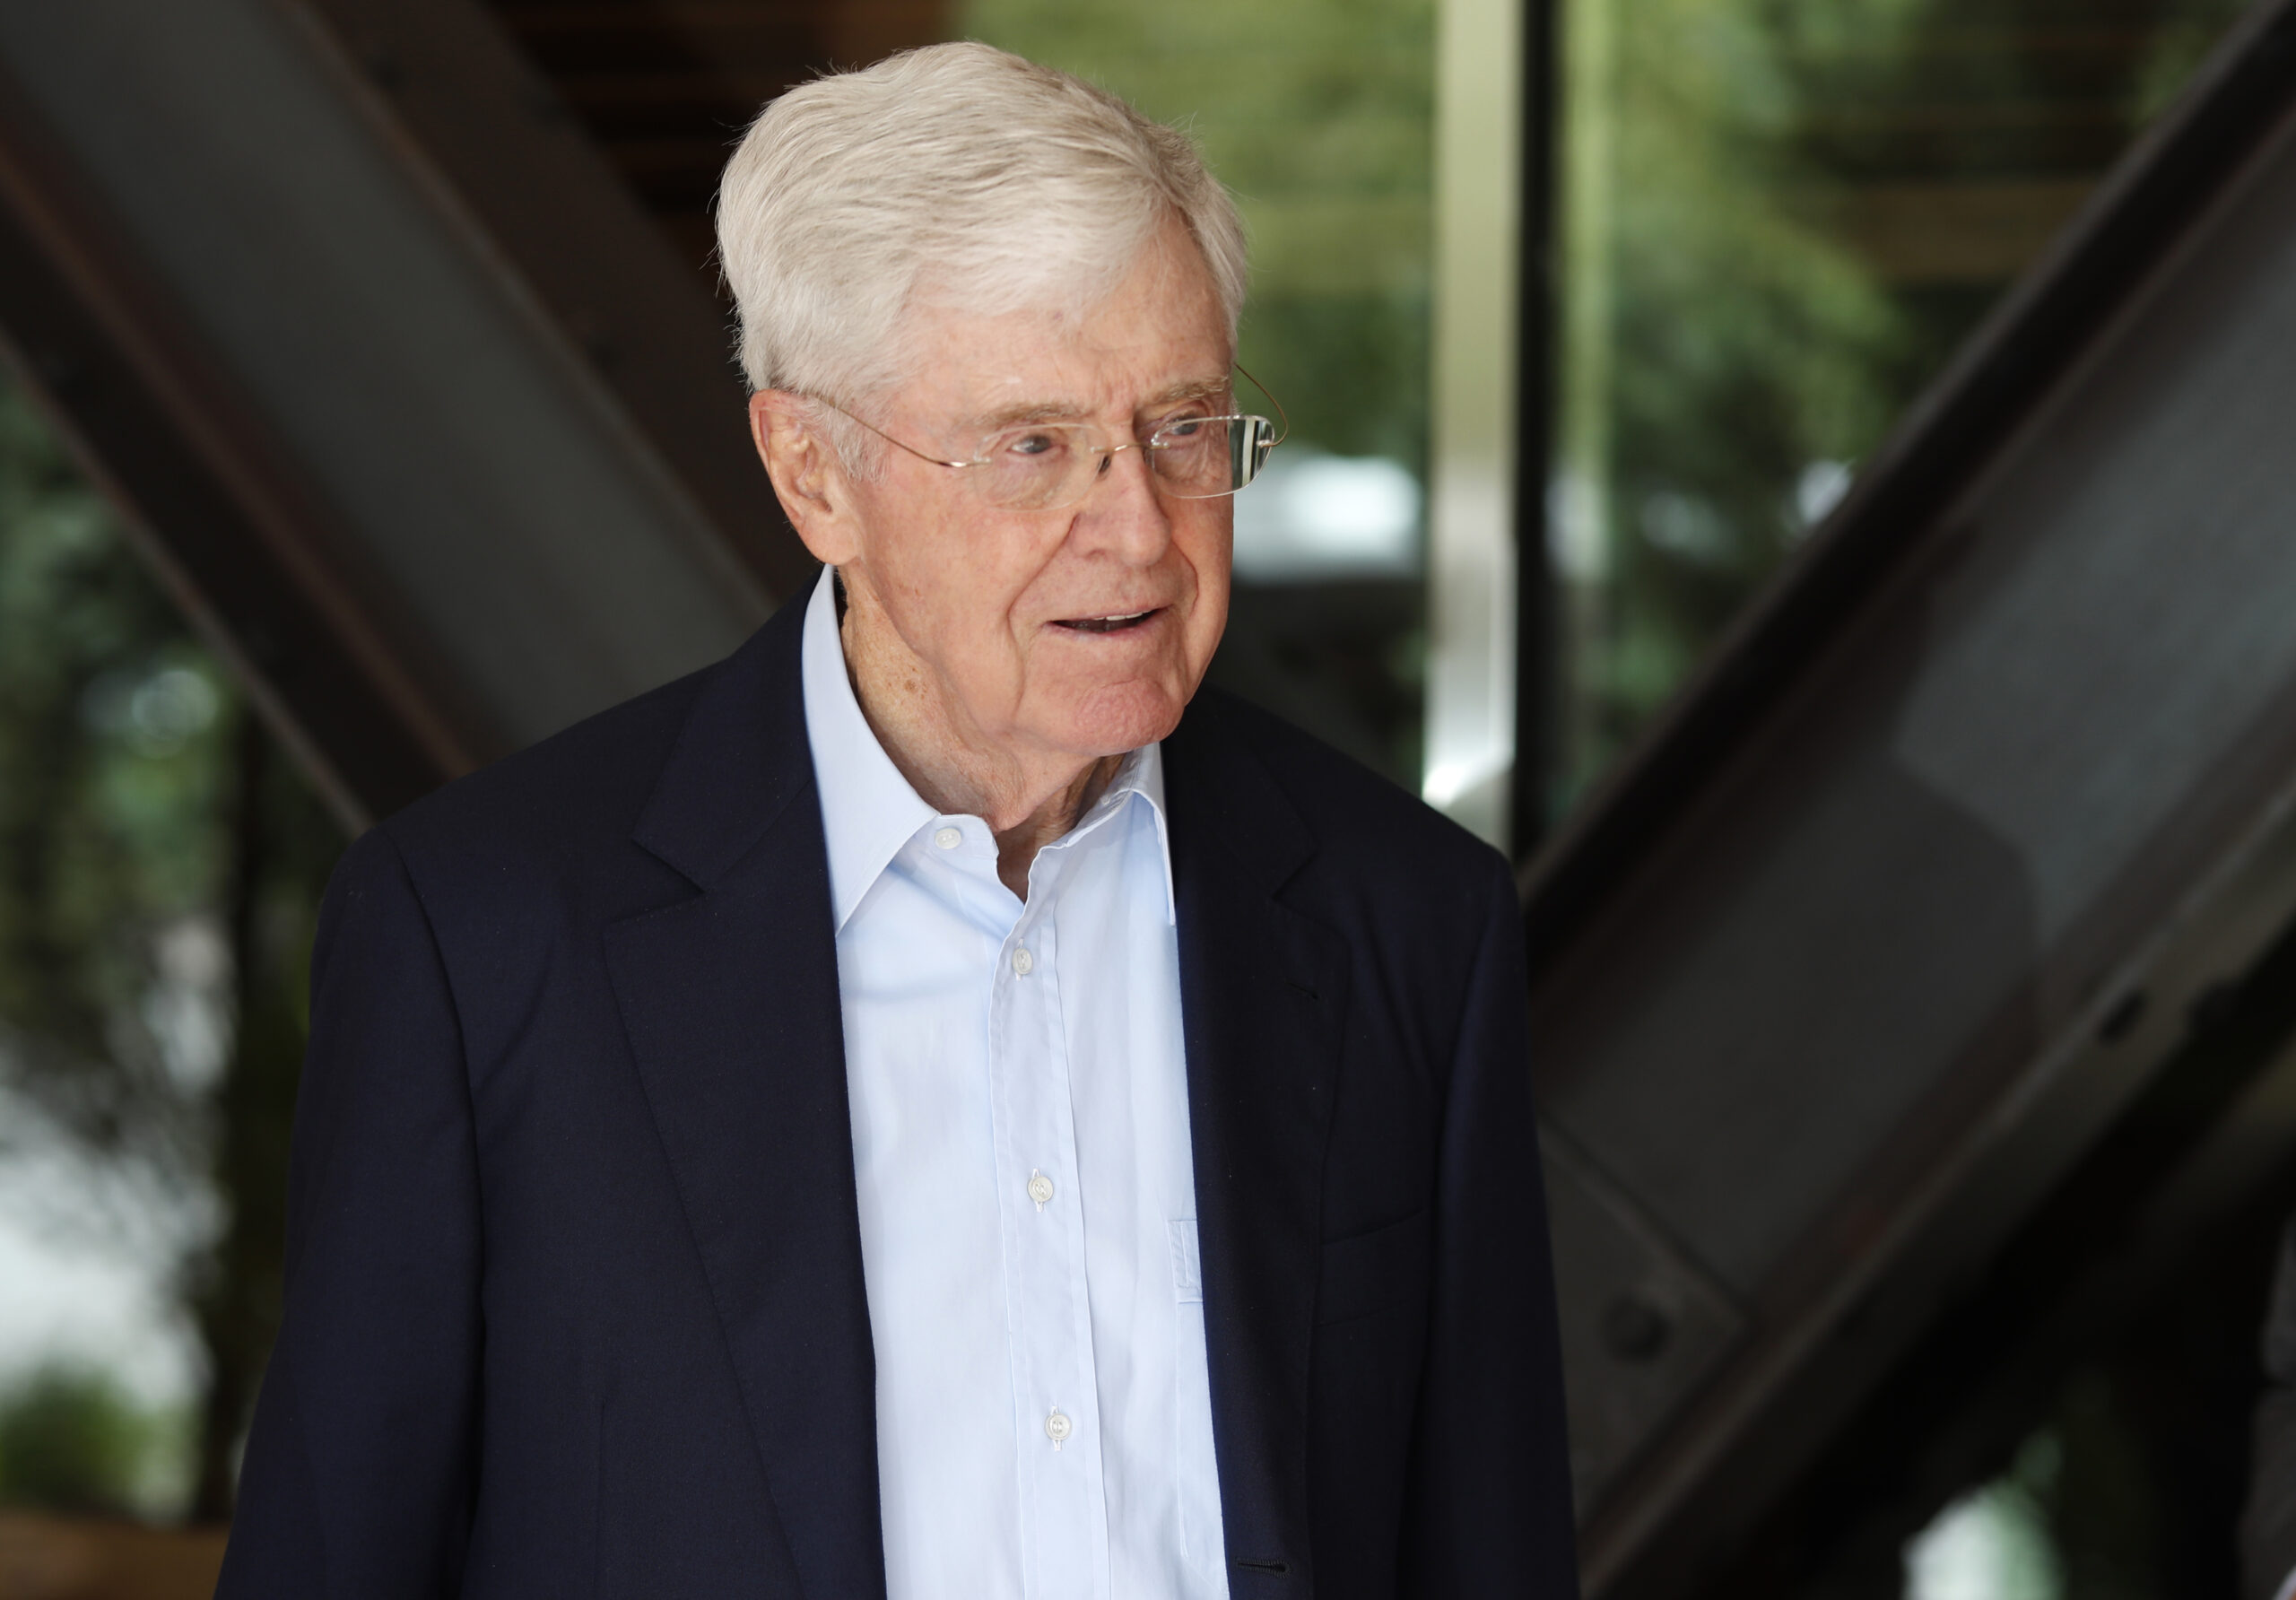 Trump Lashes Out at ‘Very Stupid, Awkward, and Highly Overrated Globalist’ Charles Koch (mediaite.com)